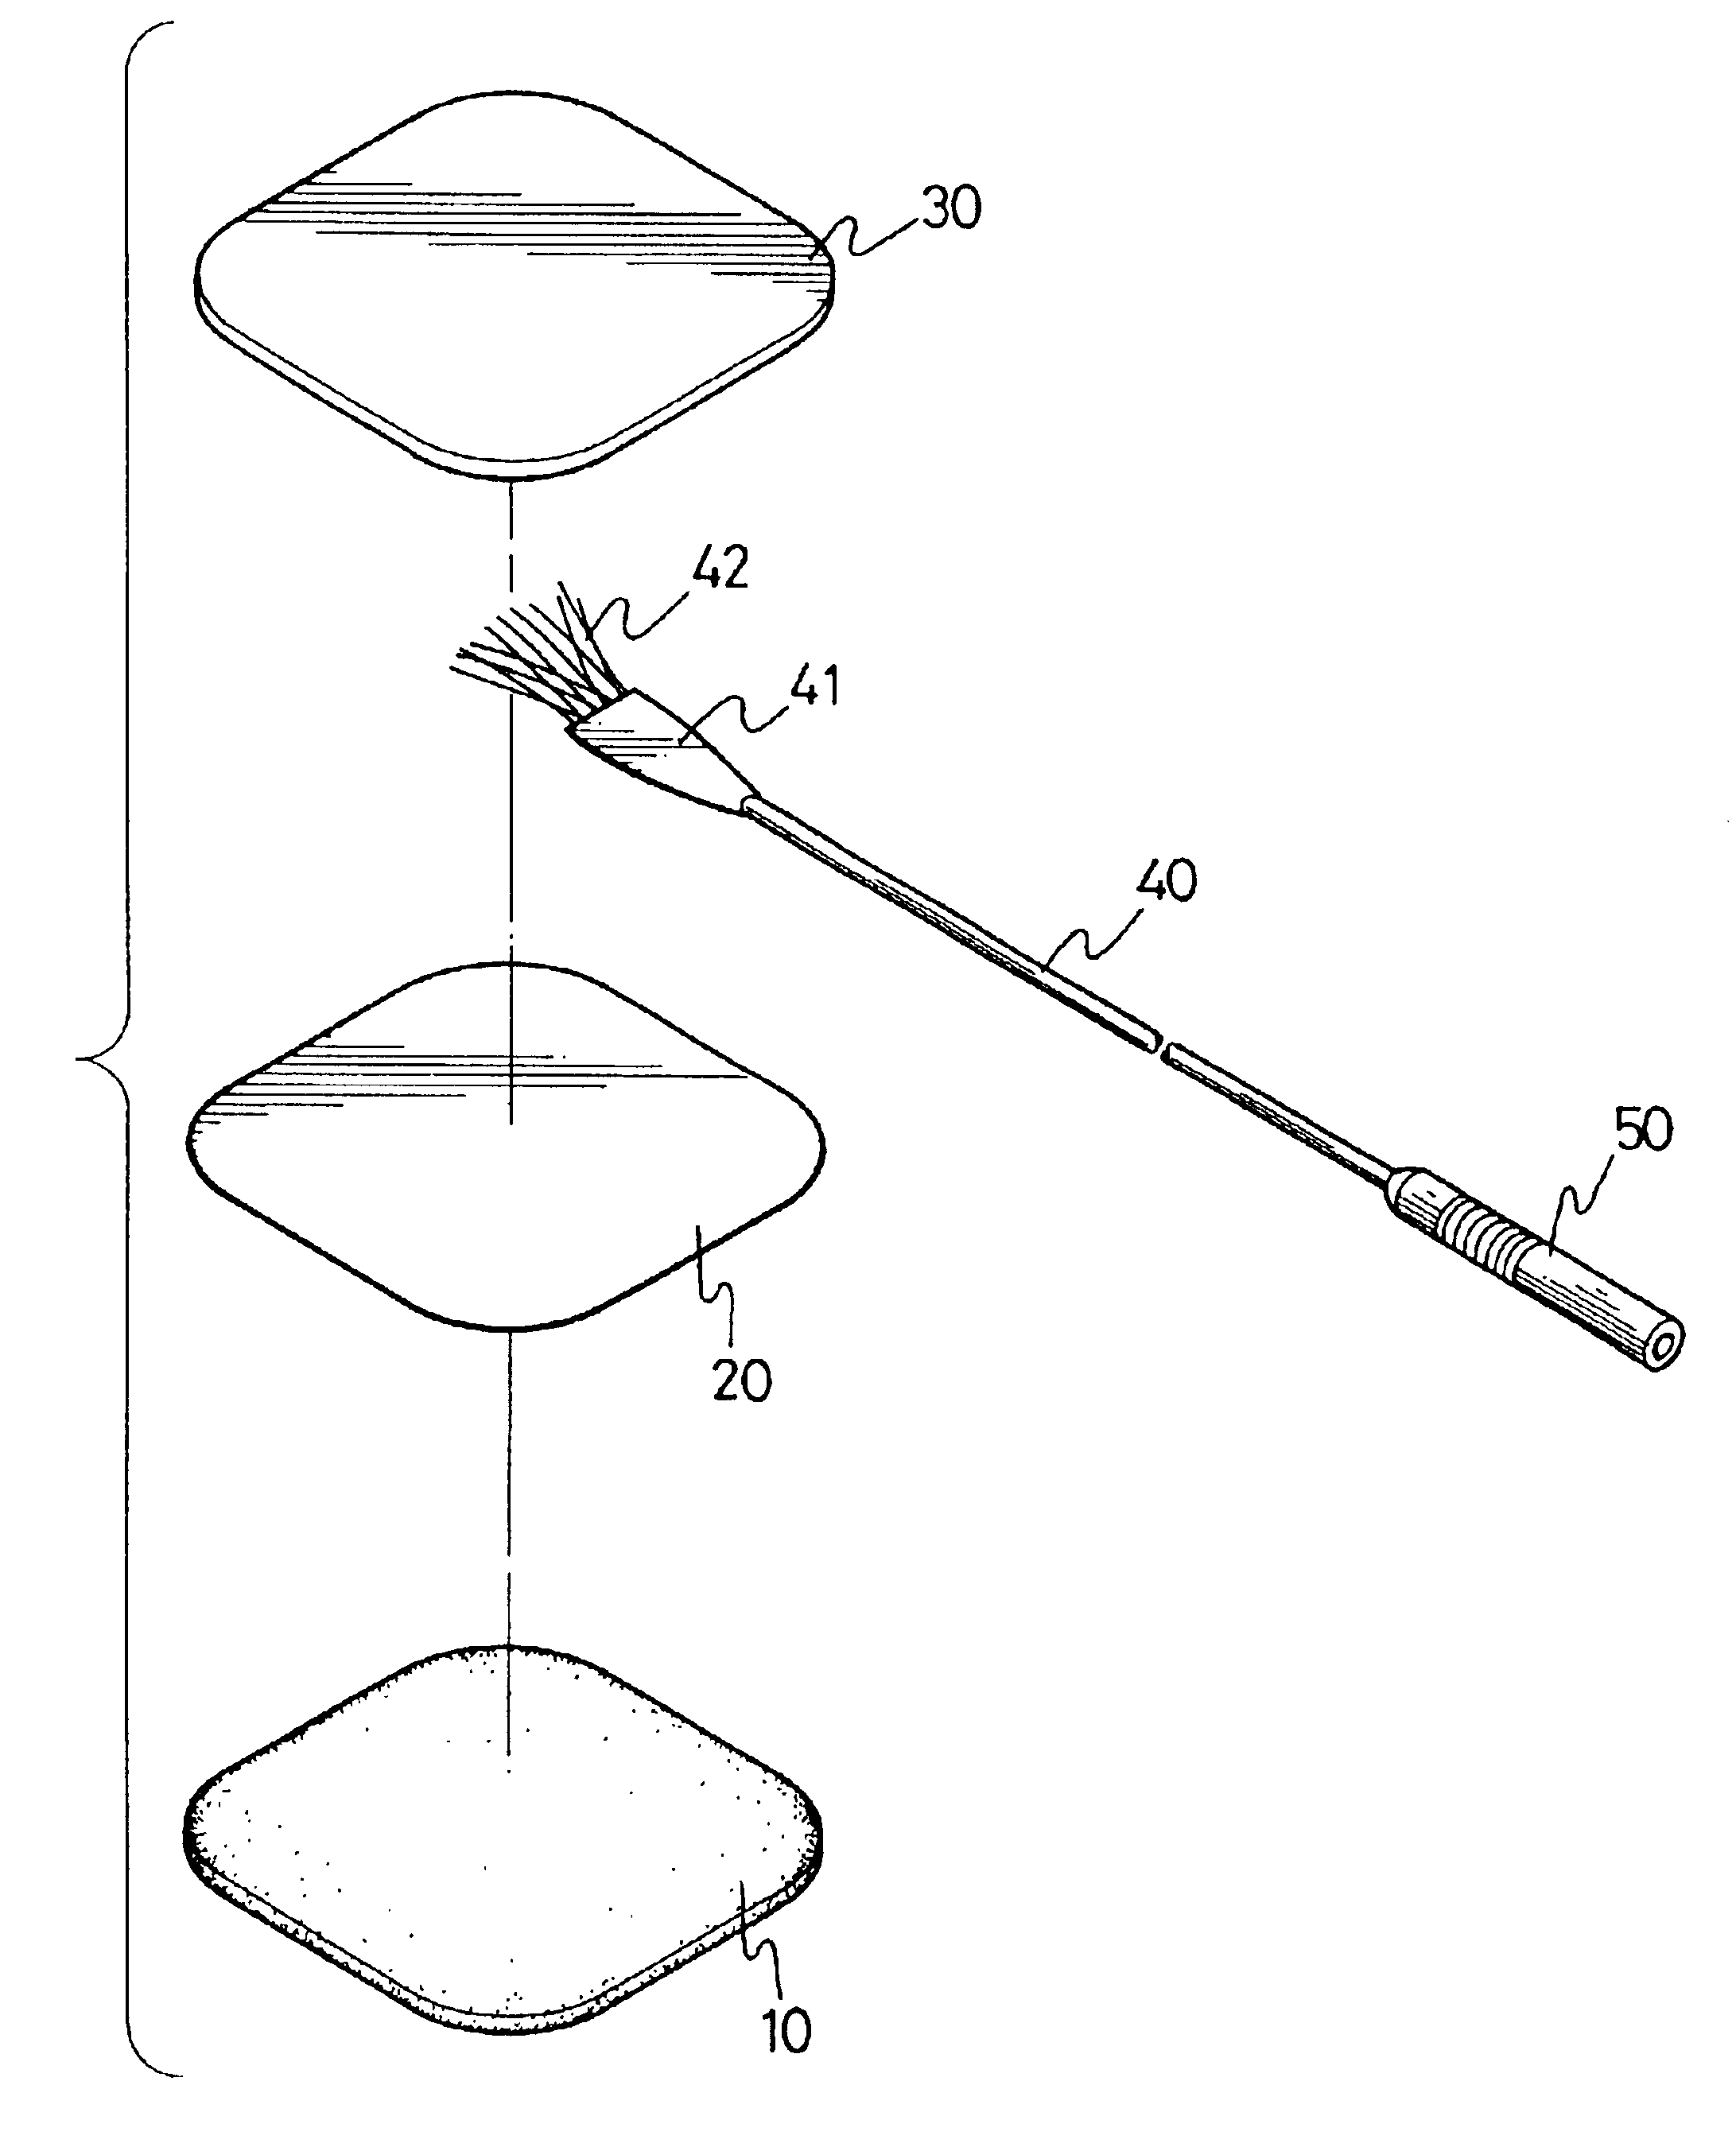 Electrodes for a transcutaneous electrical nerve stimulator